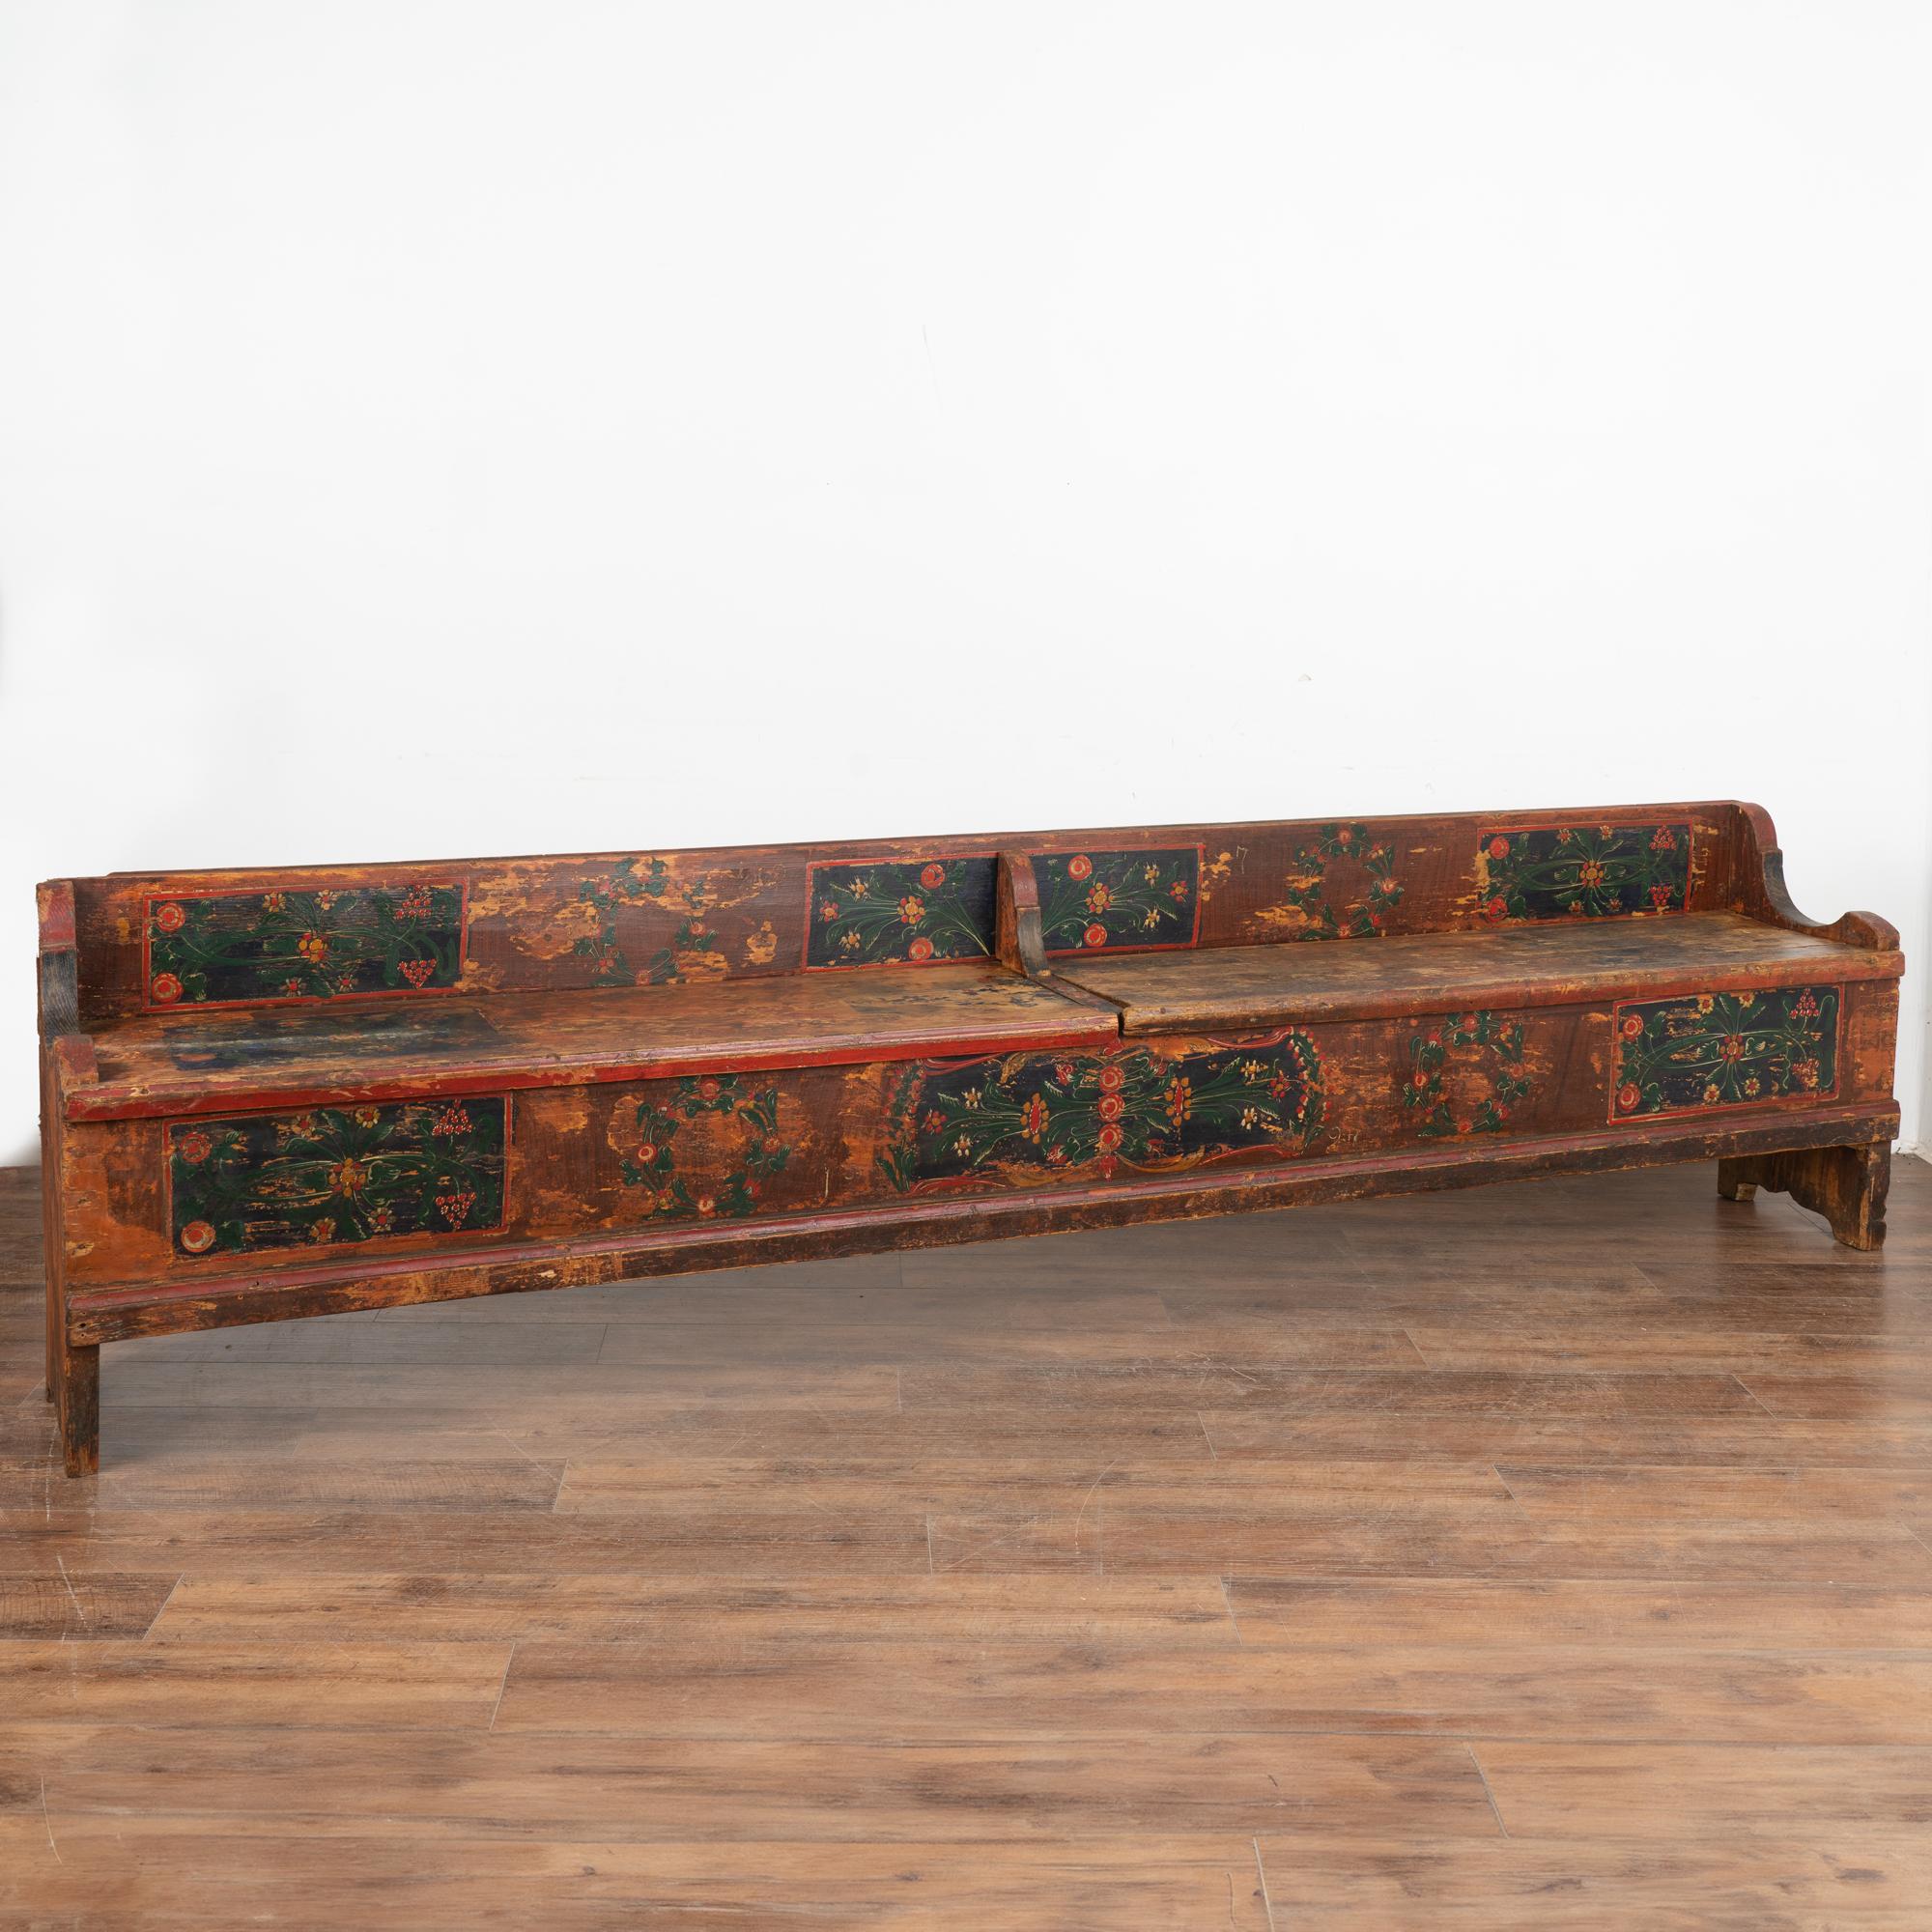 Antique hand painted bench with divided storage at just under 10' long .
Traditional Eastern European folk art painting with brick red/brown background and dark blue painted panels with red, green and yellow florals.
Two bench seats open to reveal